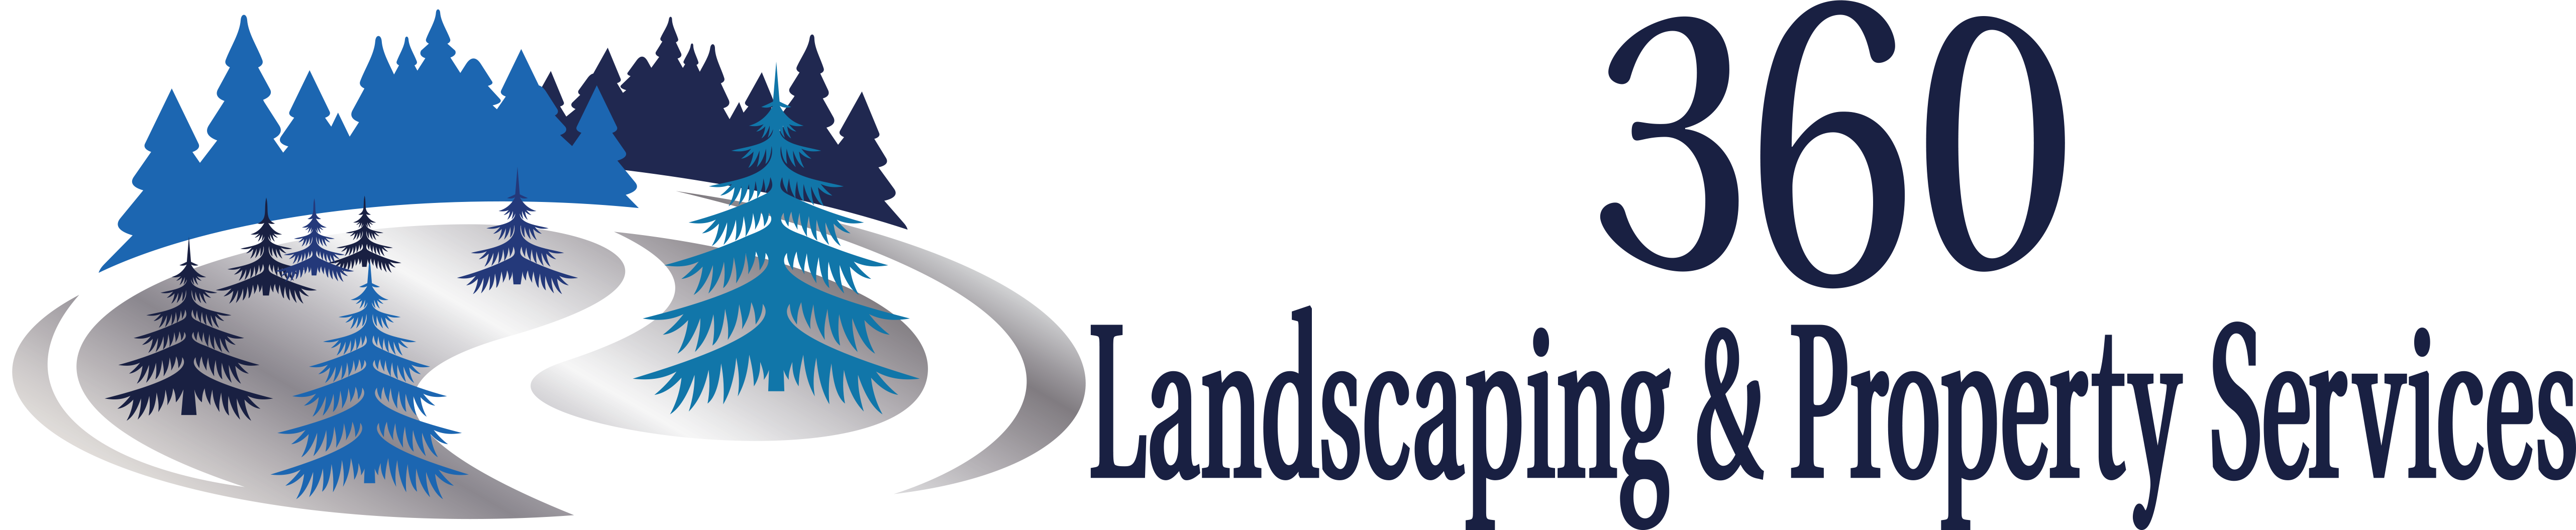 360 Landscaping & Property Services Lewiston Gaylord